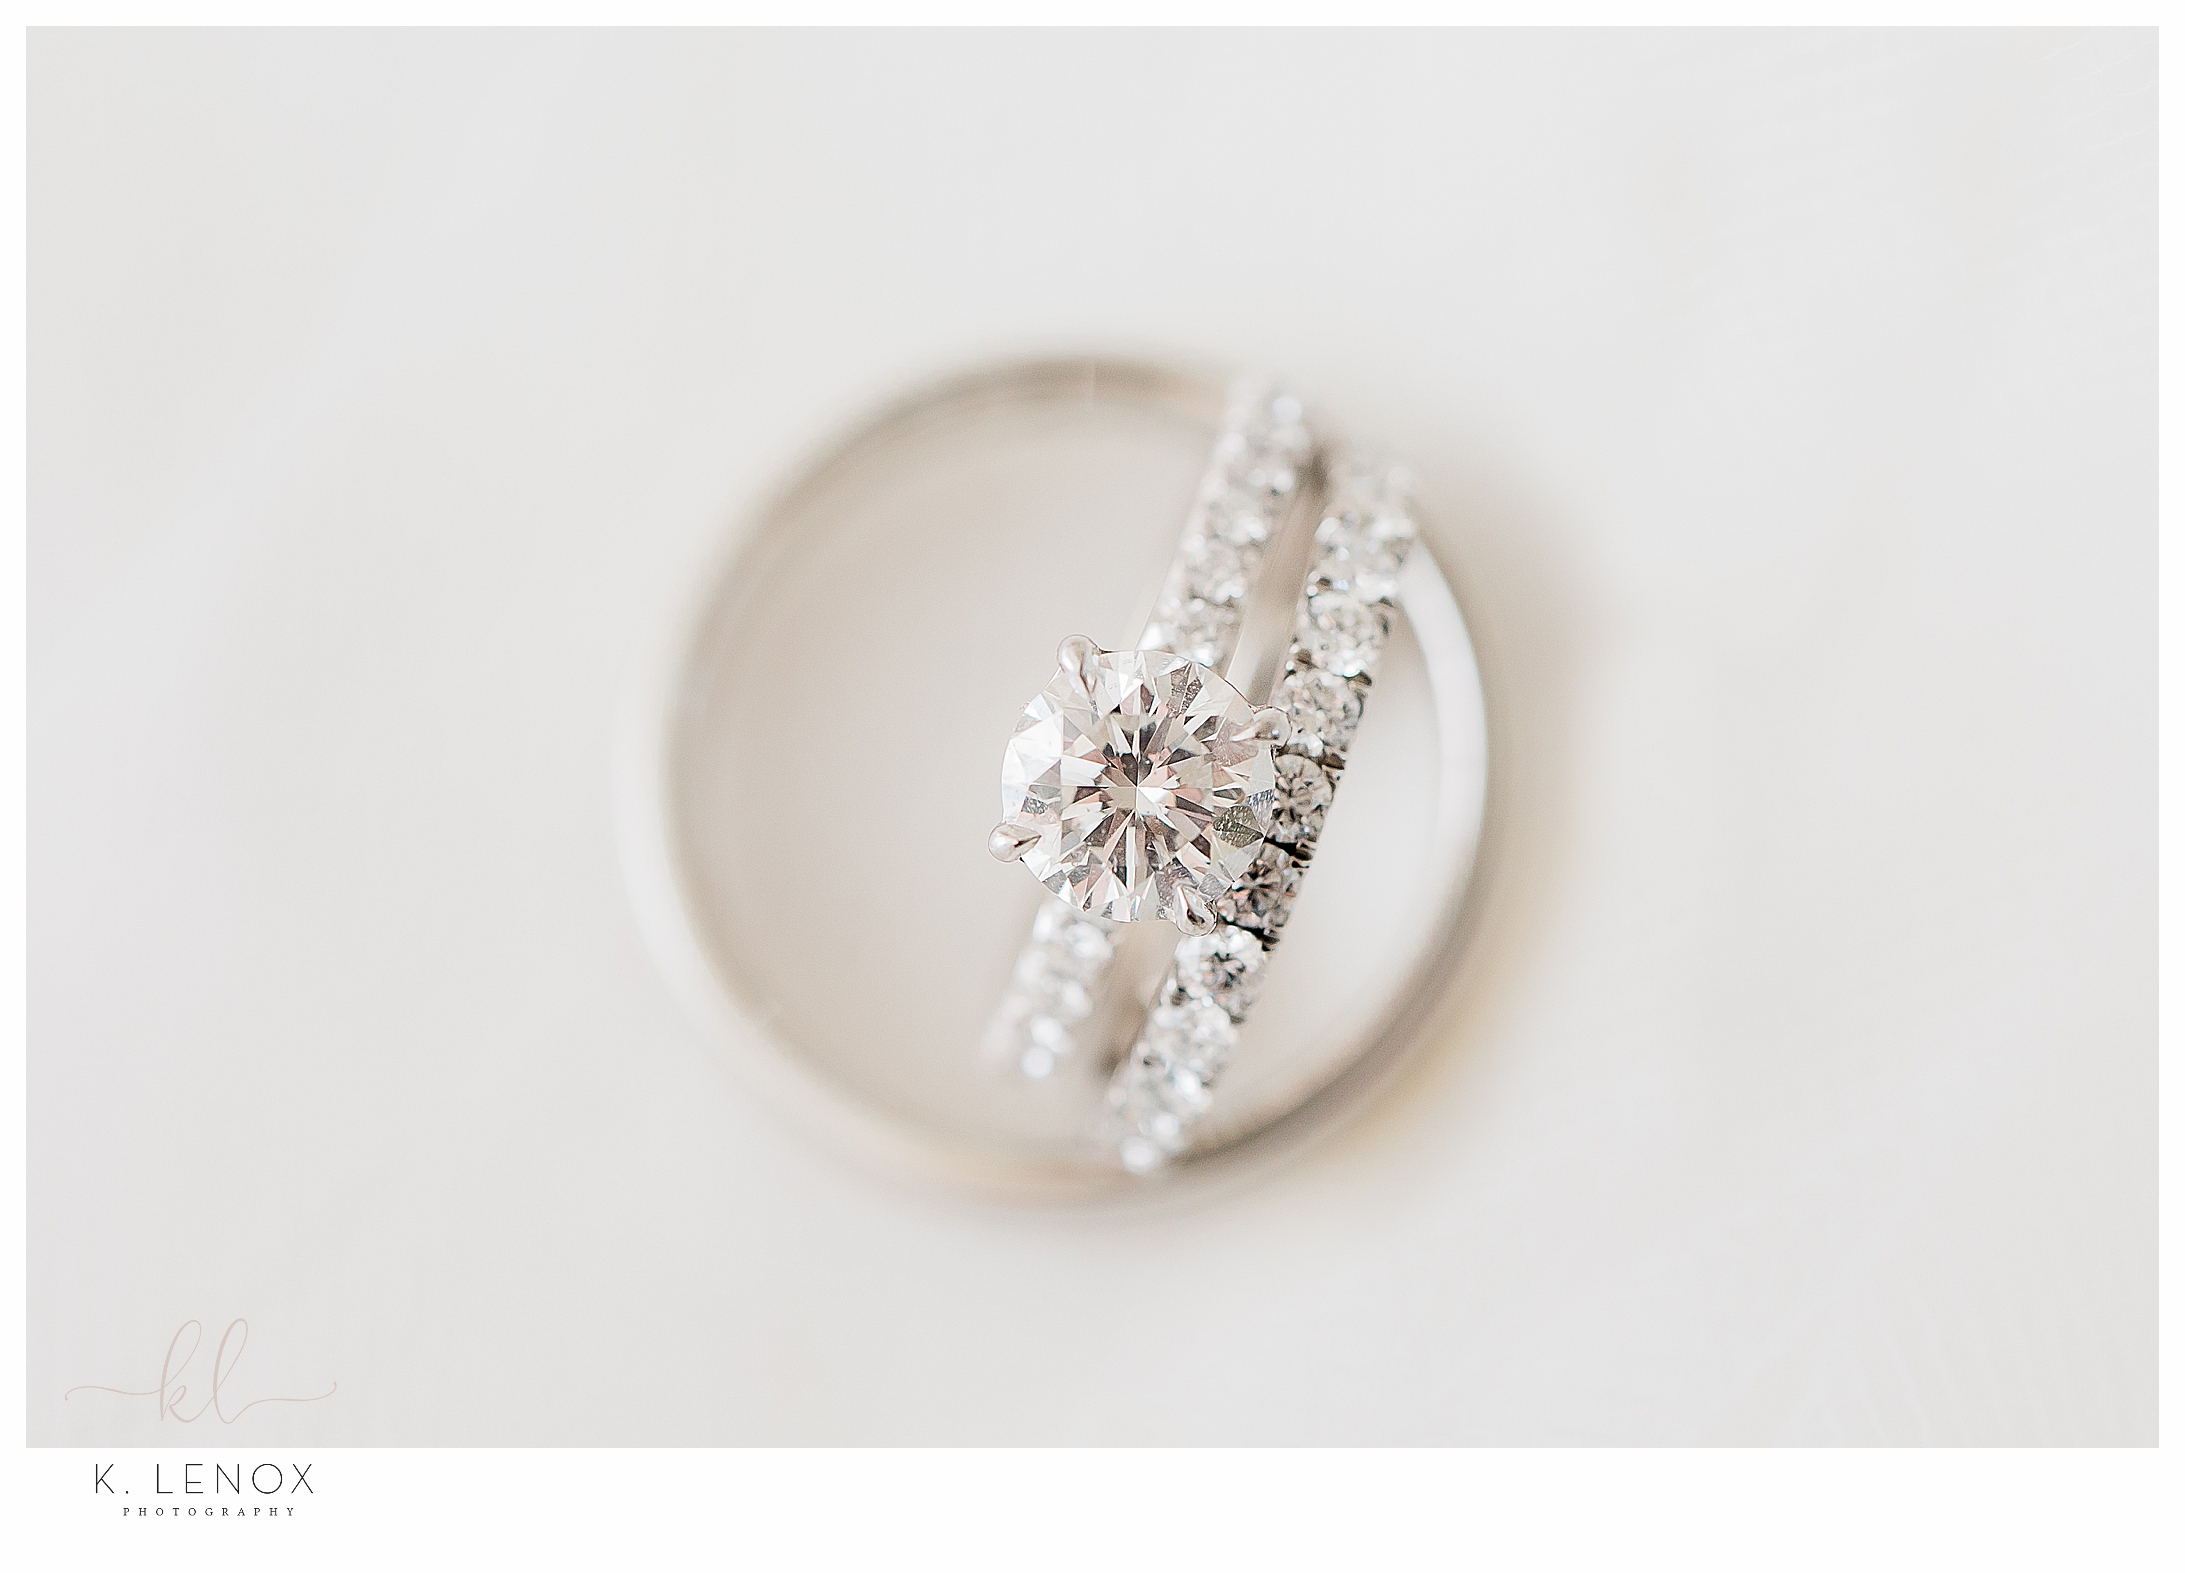 Clean and Simple ring shot showing a diamond engagement ring and an eternity wedding band. 